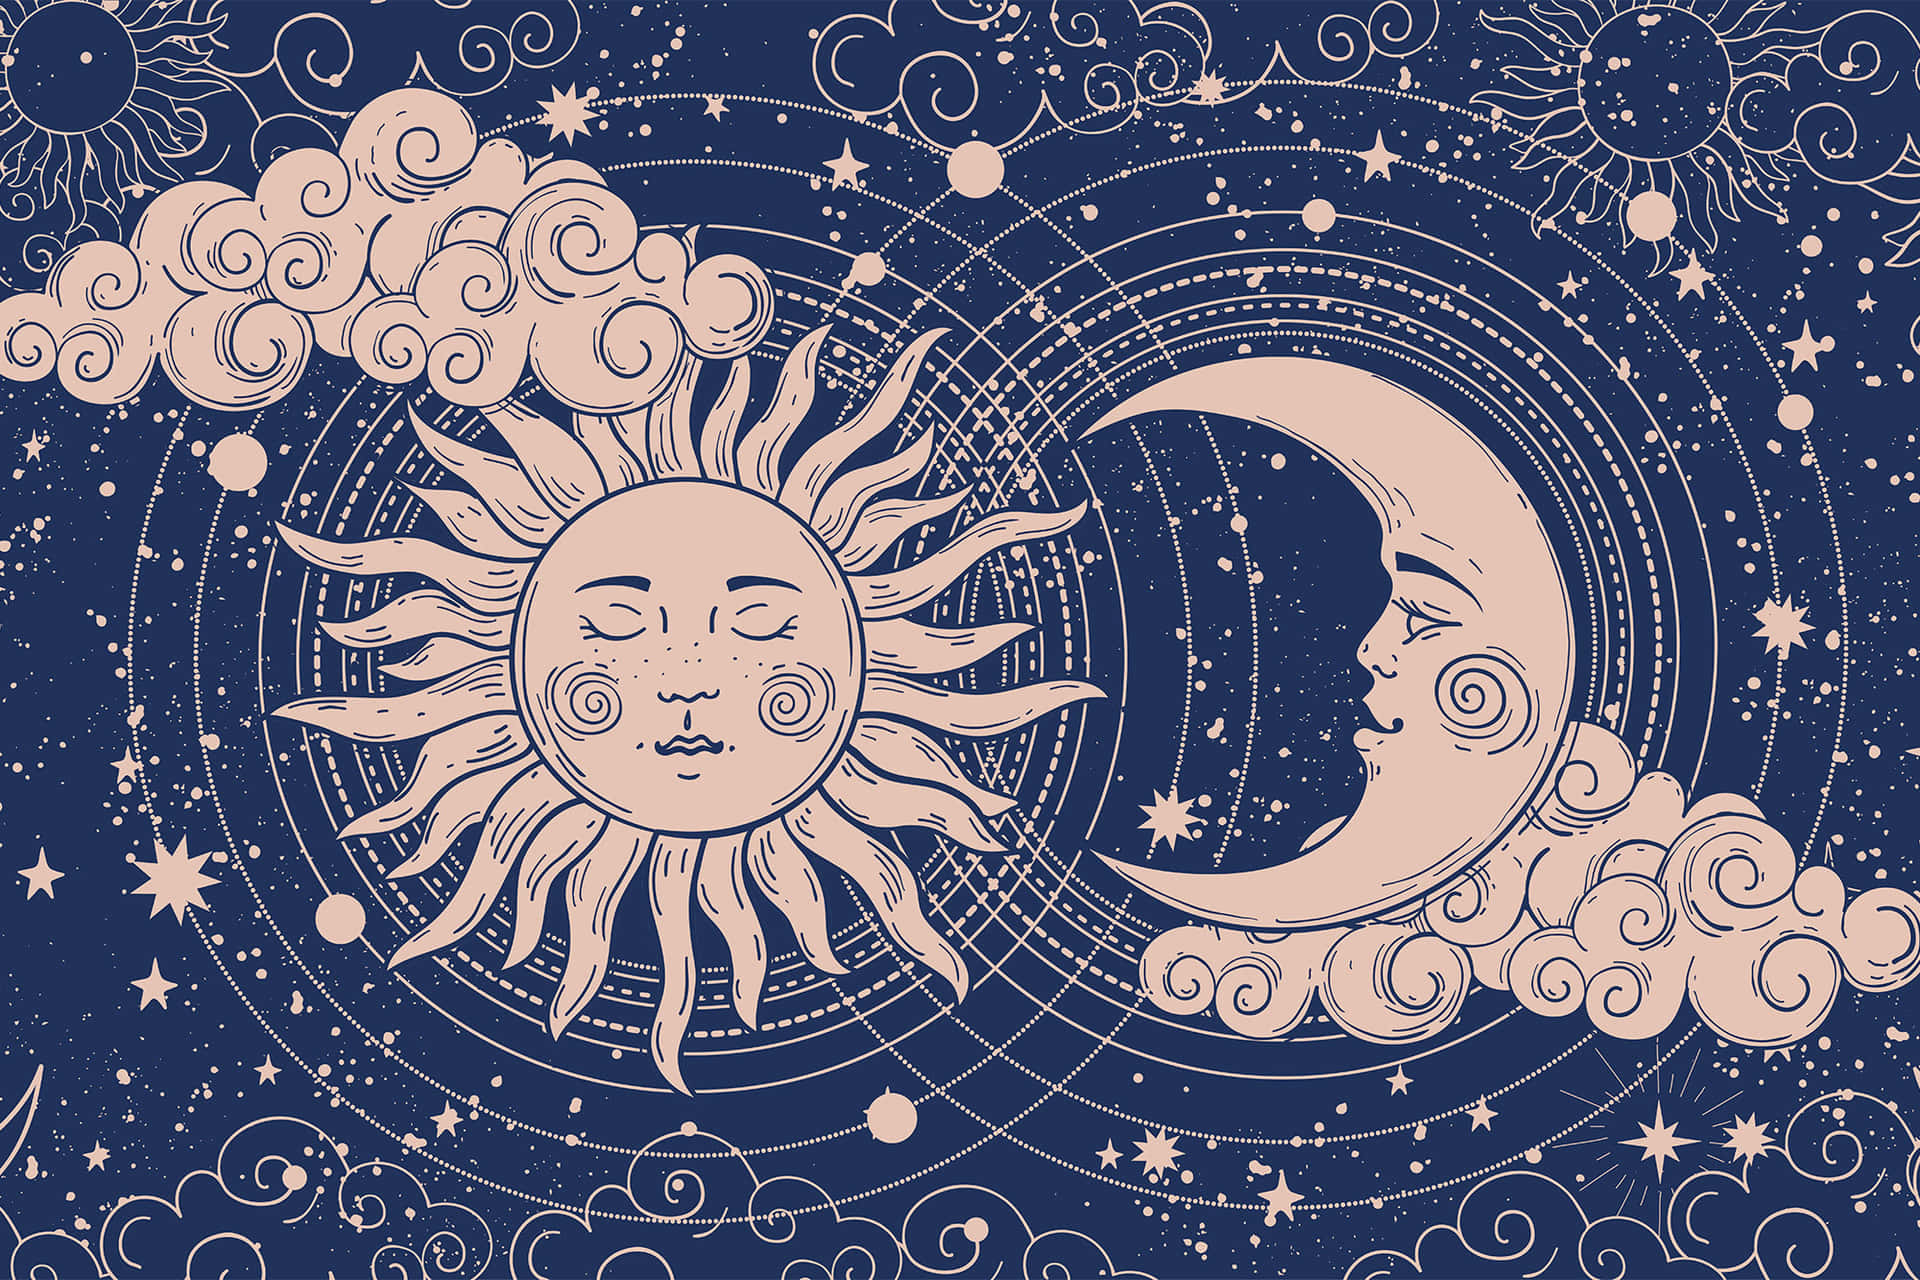 The Sun and Moon each have its own unique place in the sky.